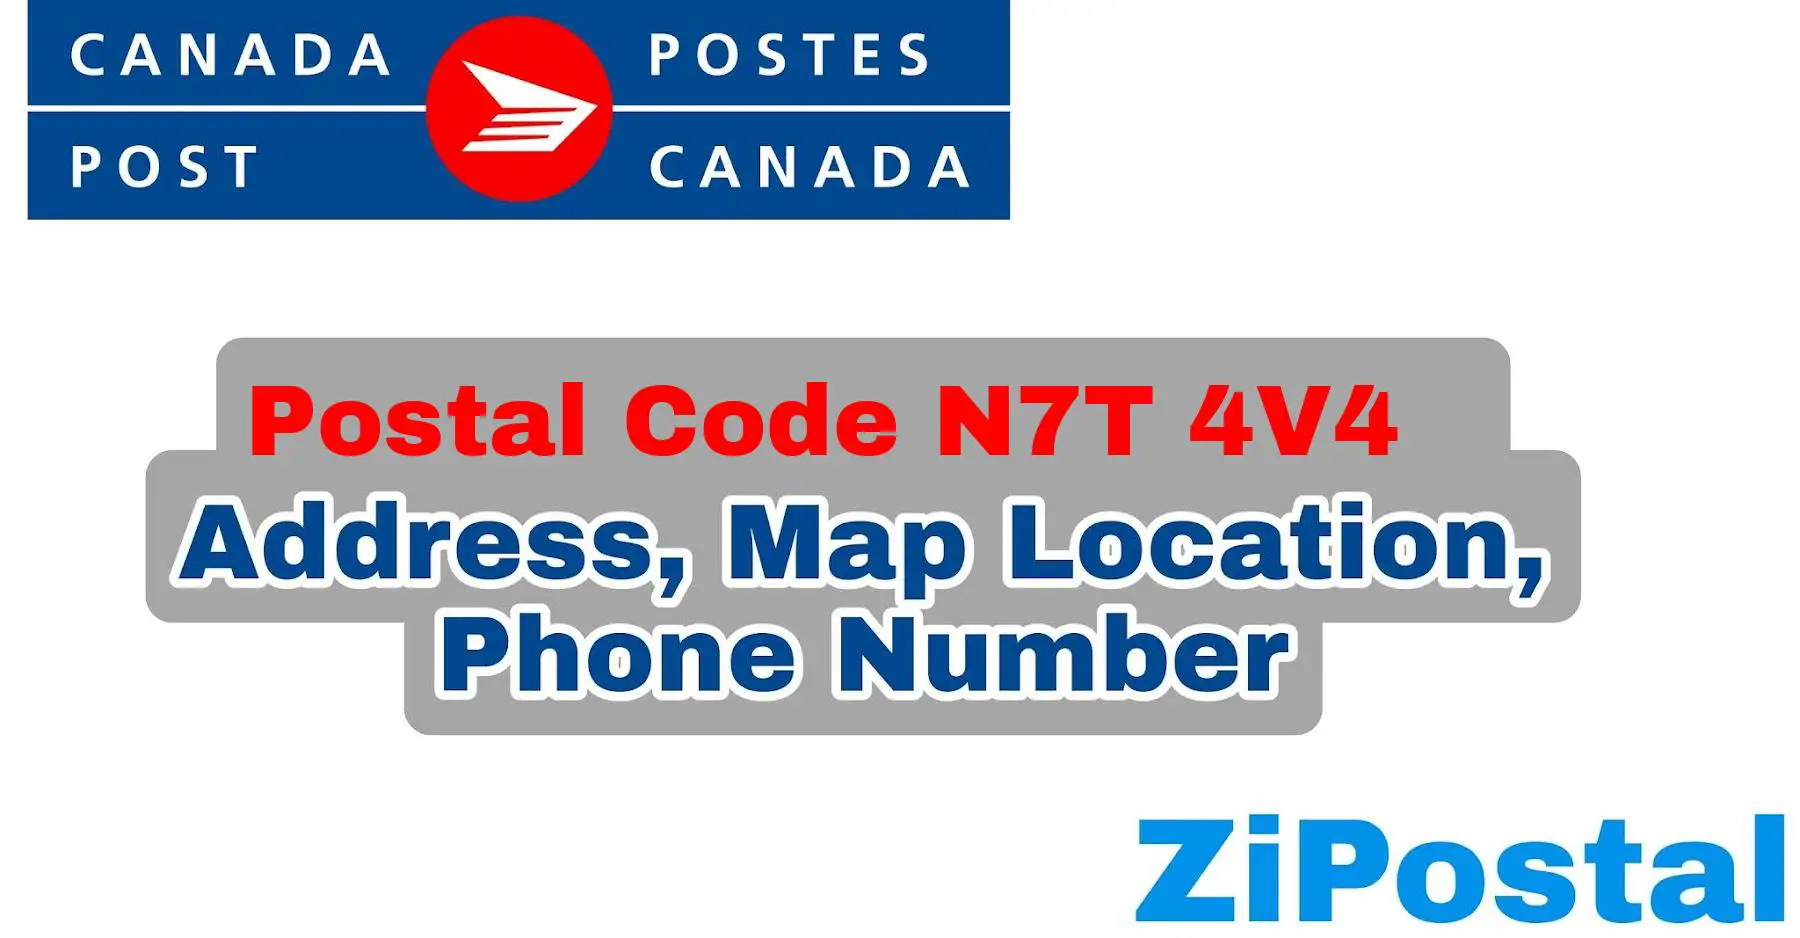 Postal Code N7T 4V4 Address Map Location and Phone Number